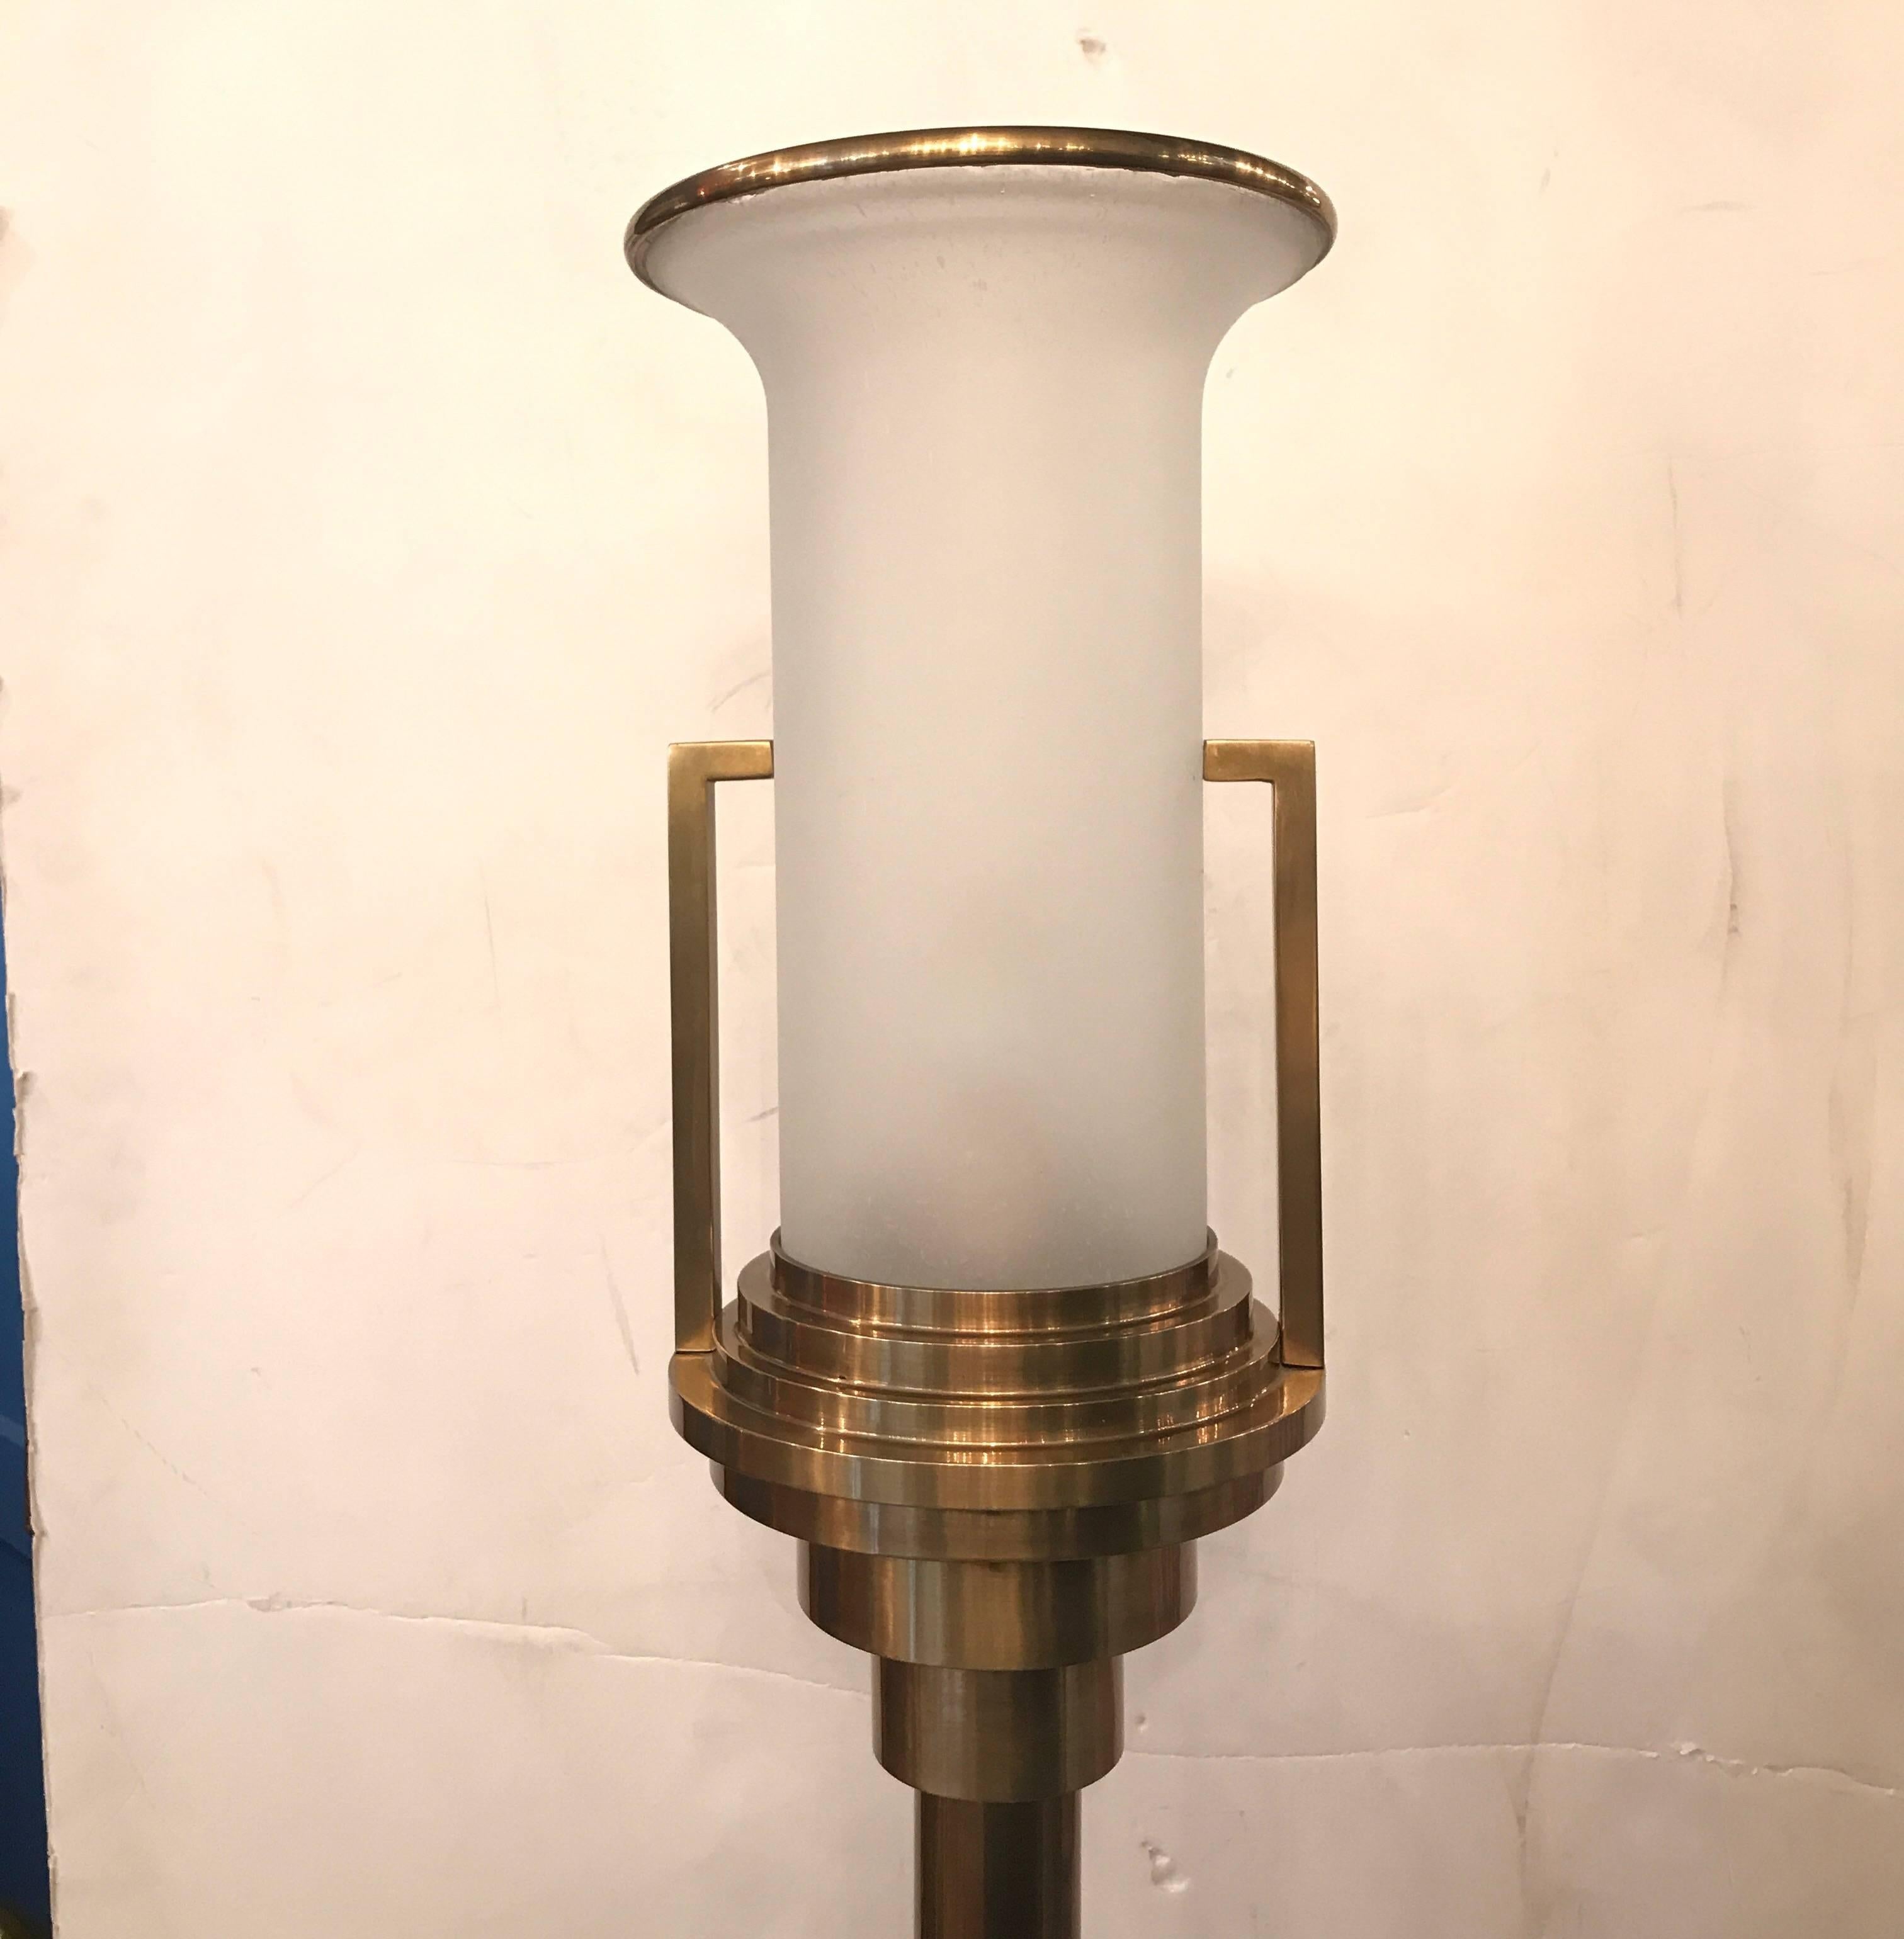 A pair of high style Italian burnished cast brass and opaque white class torchere floor lamps. Deco style with flared glass shades, stepped tops with handles and weighted bases.